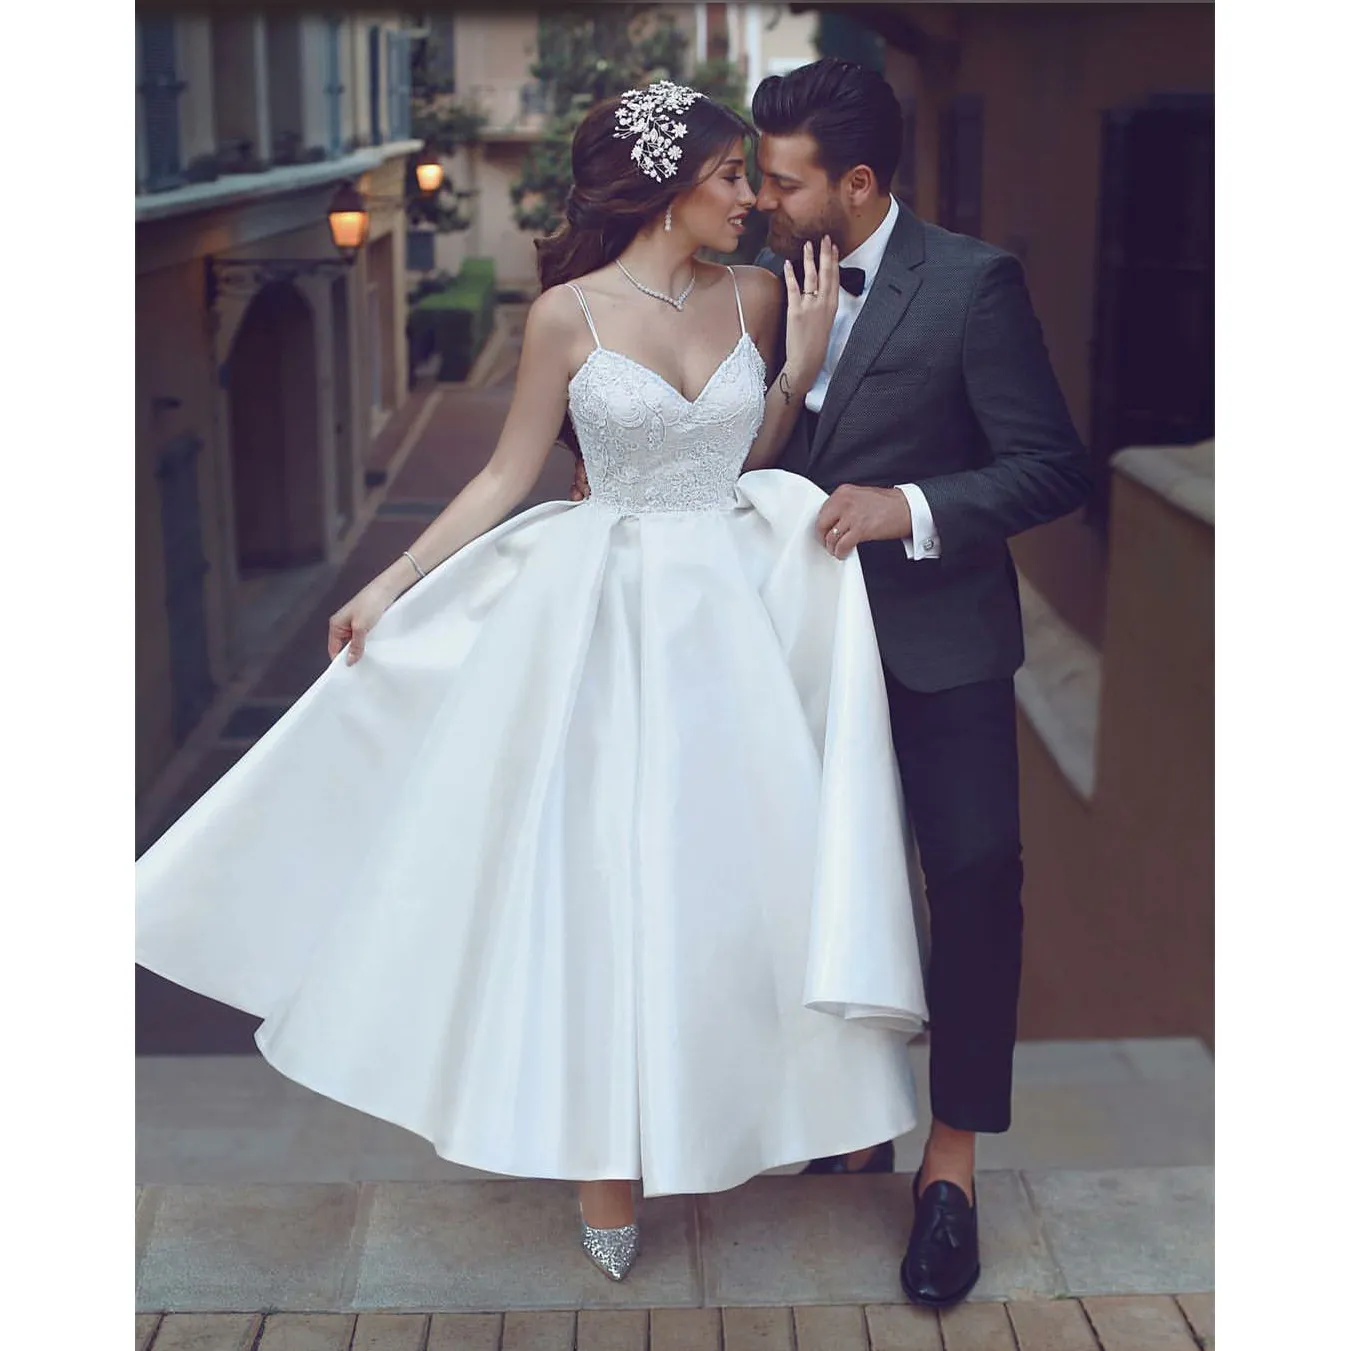 Short Ankle Length Bridal Dress Lovely White Lace Applique Spaghetti Straps Satin Wedding Gown Said Mhamad A-Line Backless Wedding Dresses